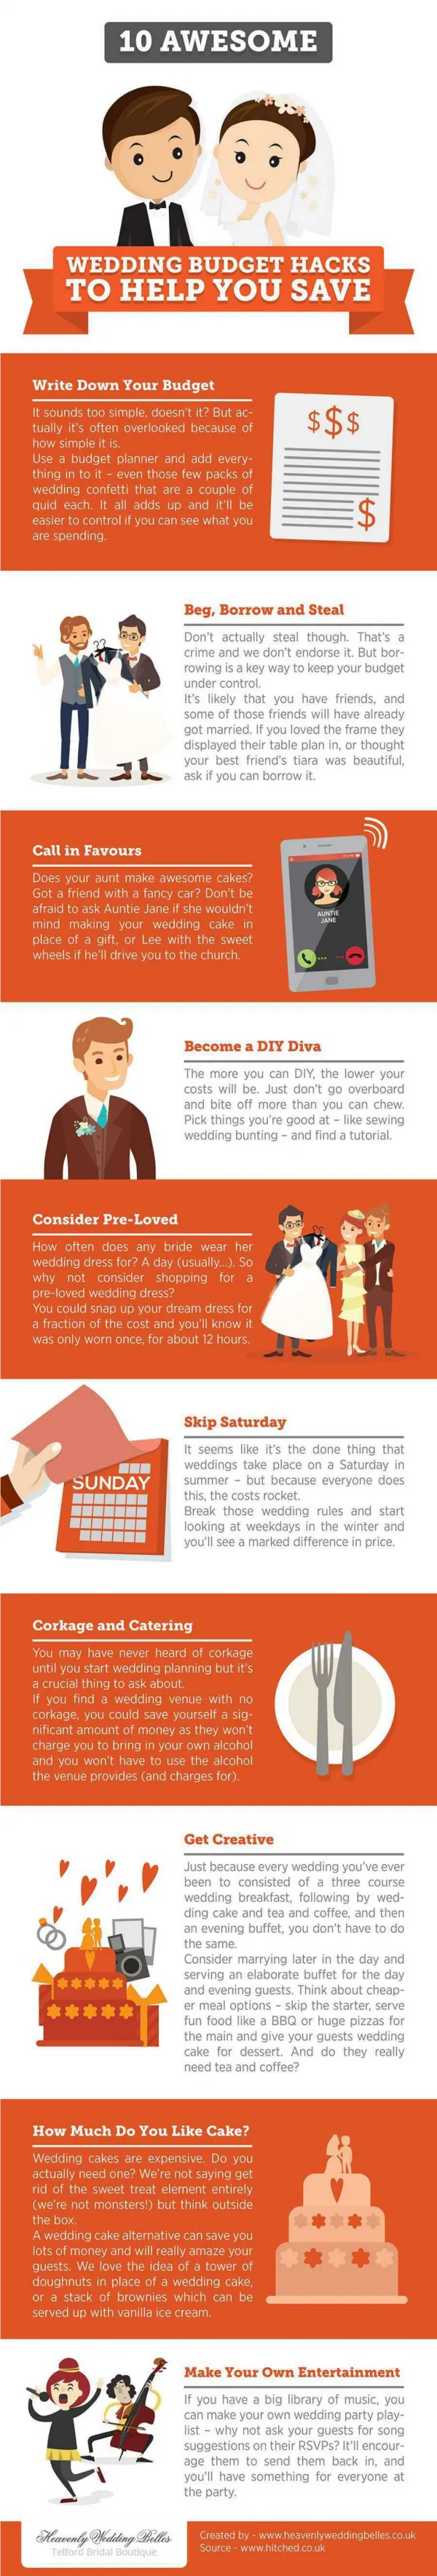 https://www.heavenlyweddingbelles.co.uk/10-awesome-wedding-budget-hacks-help-save/ In this infographic we look at wa